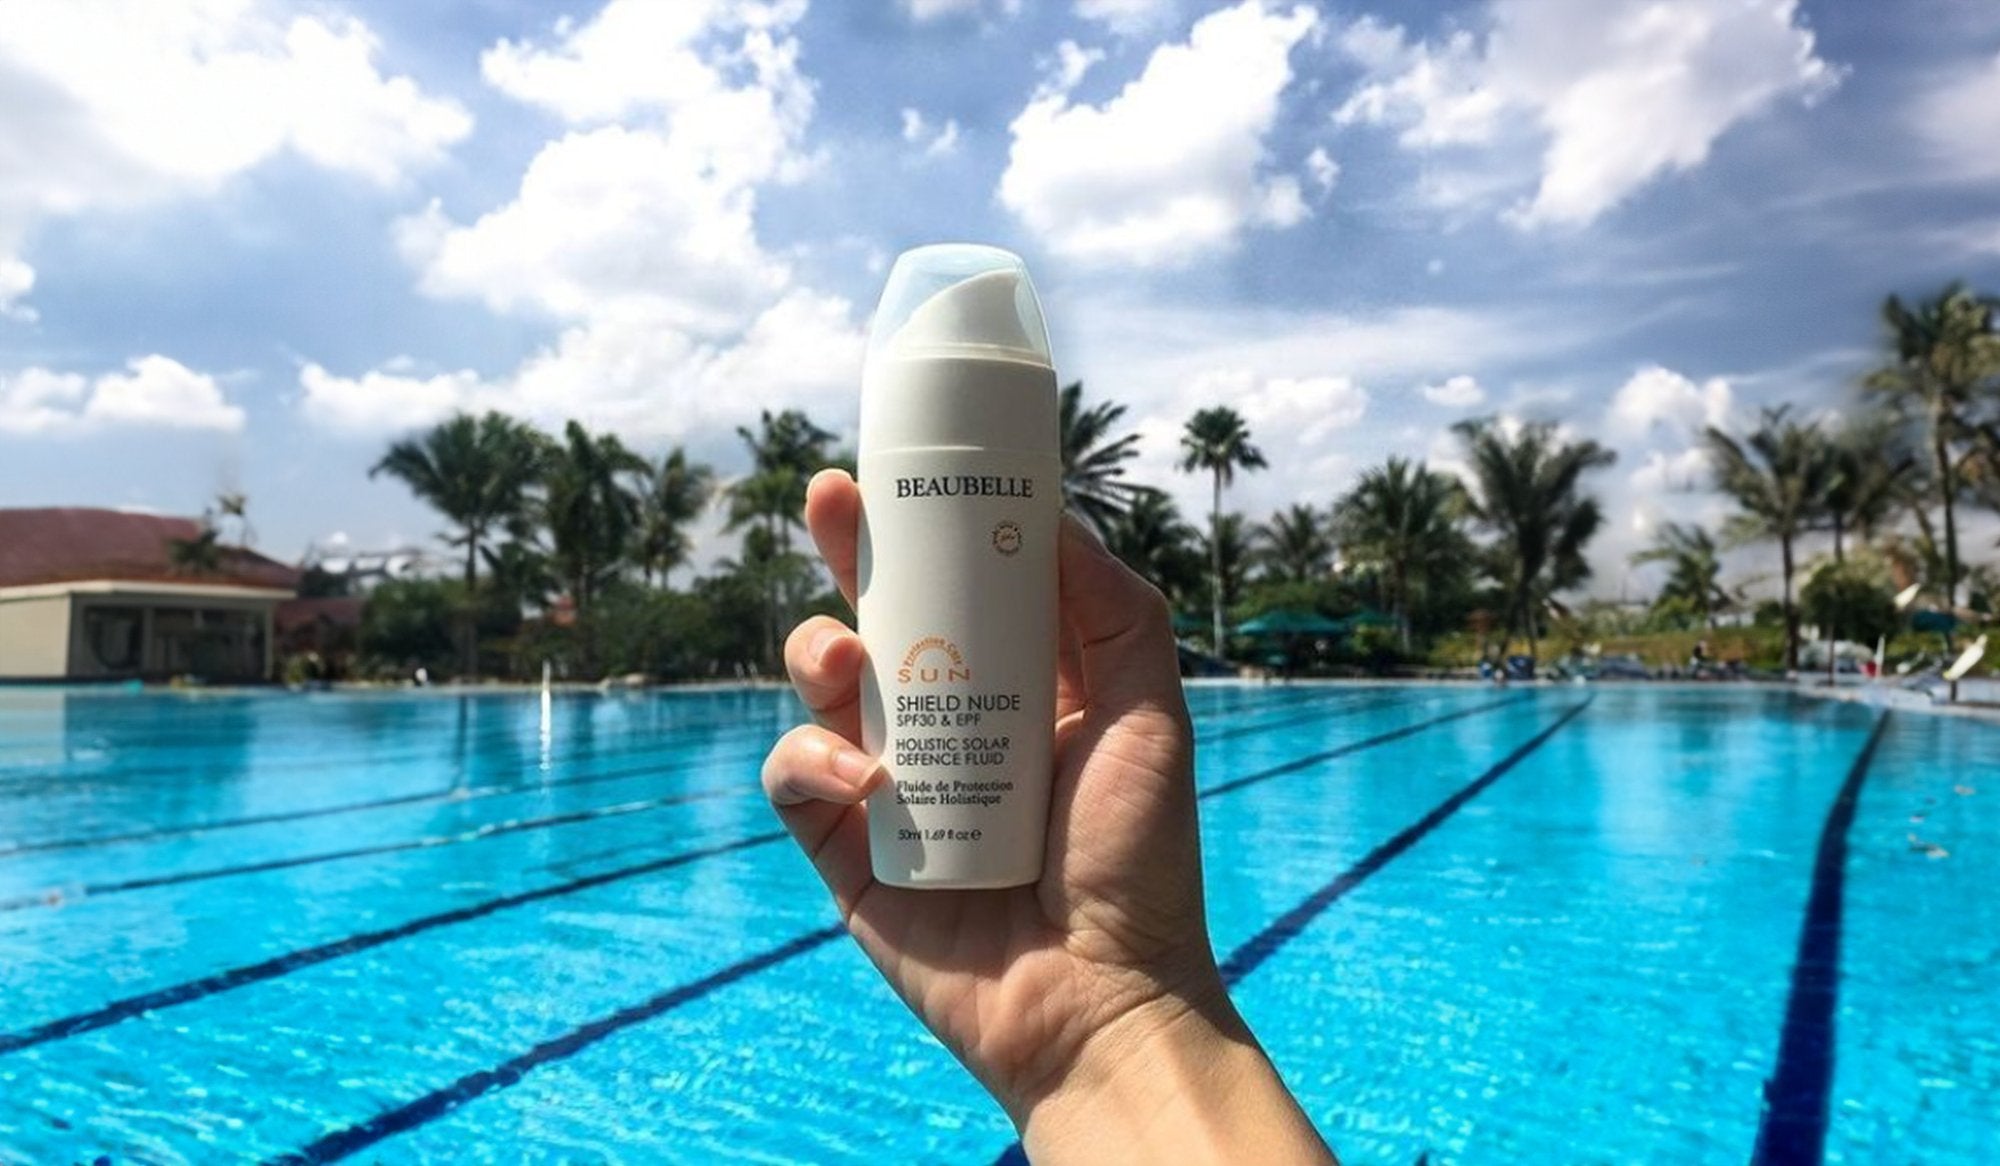 Beaubelle Malaysia best sunscreen! - Beaubelle Asia-Pacific